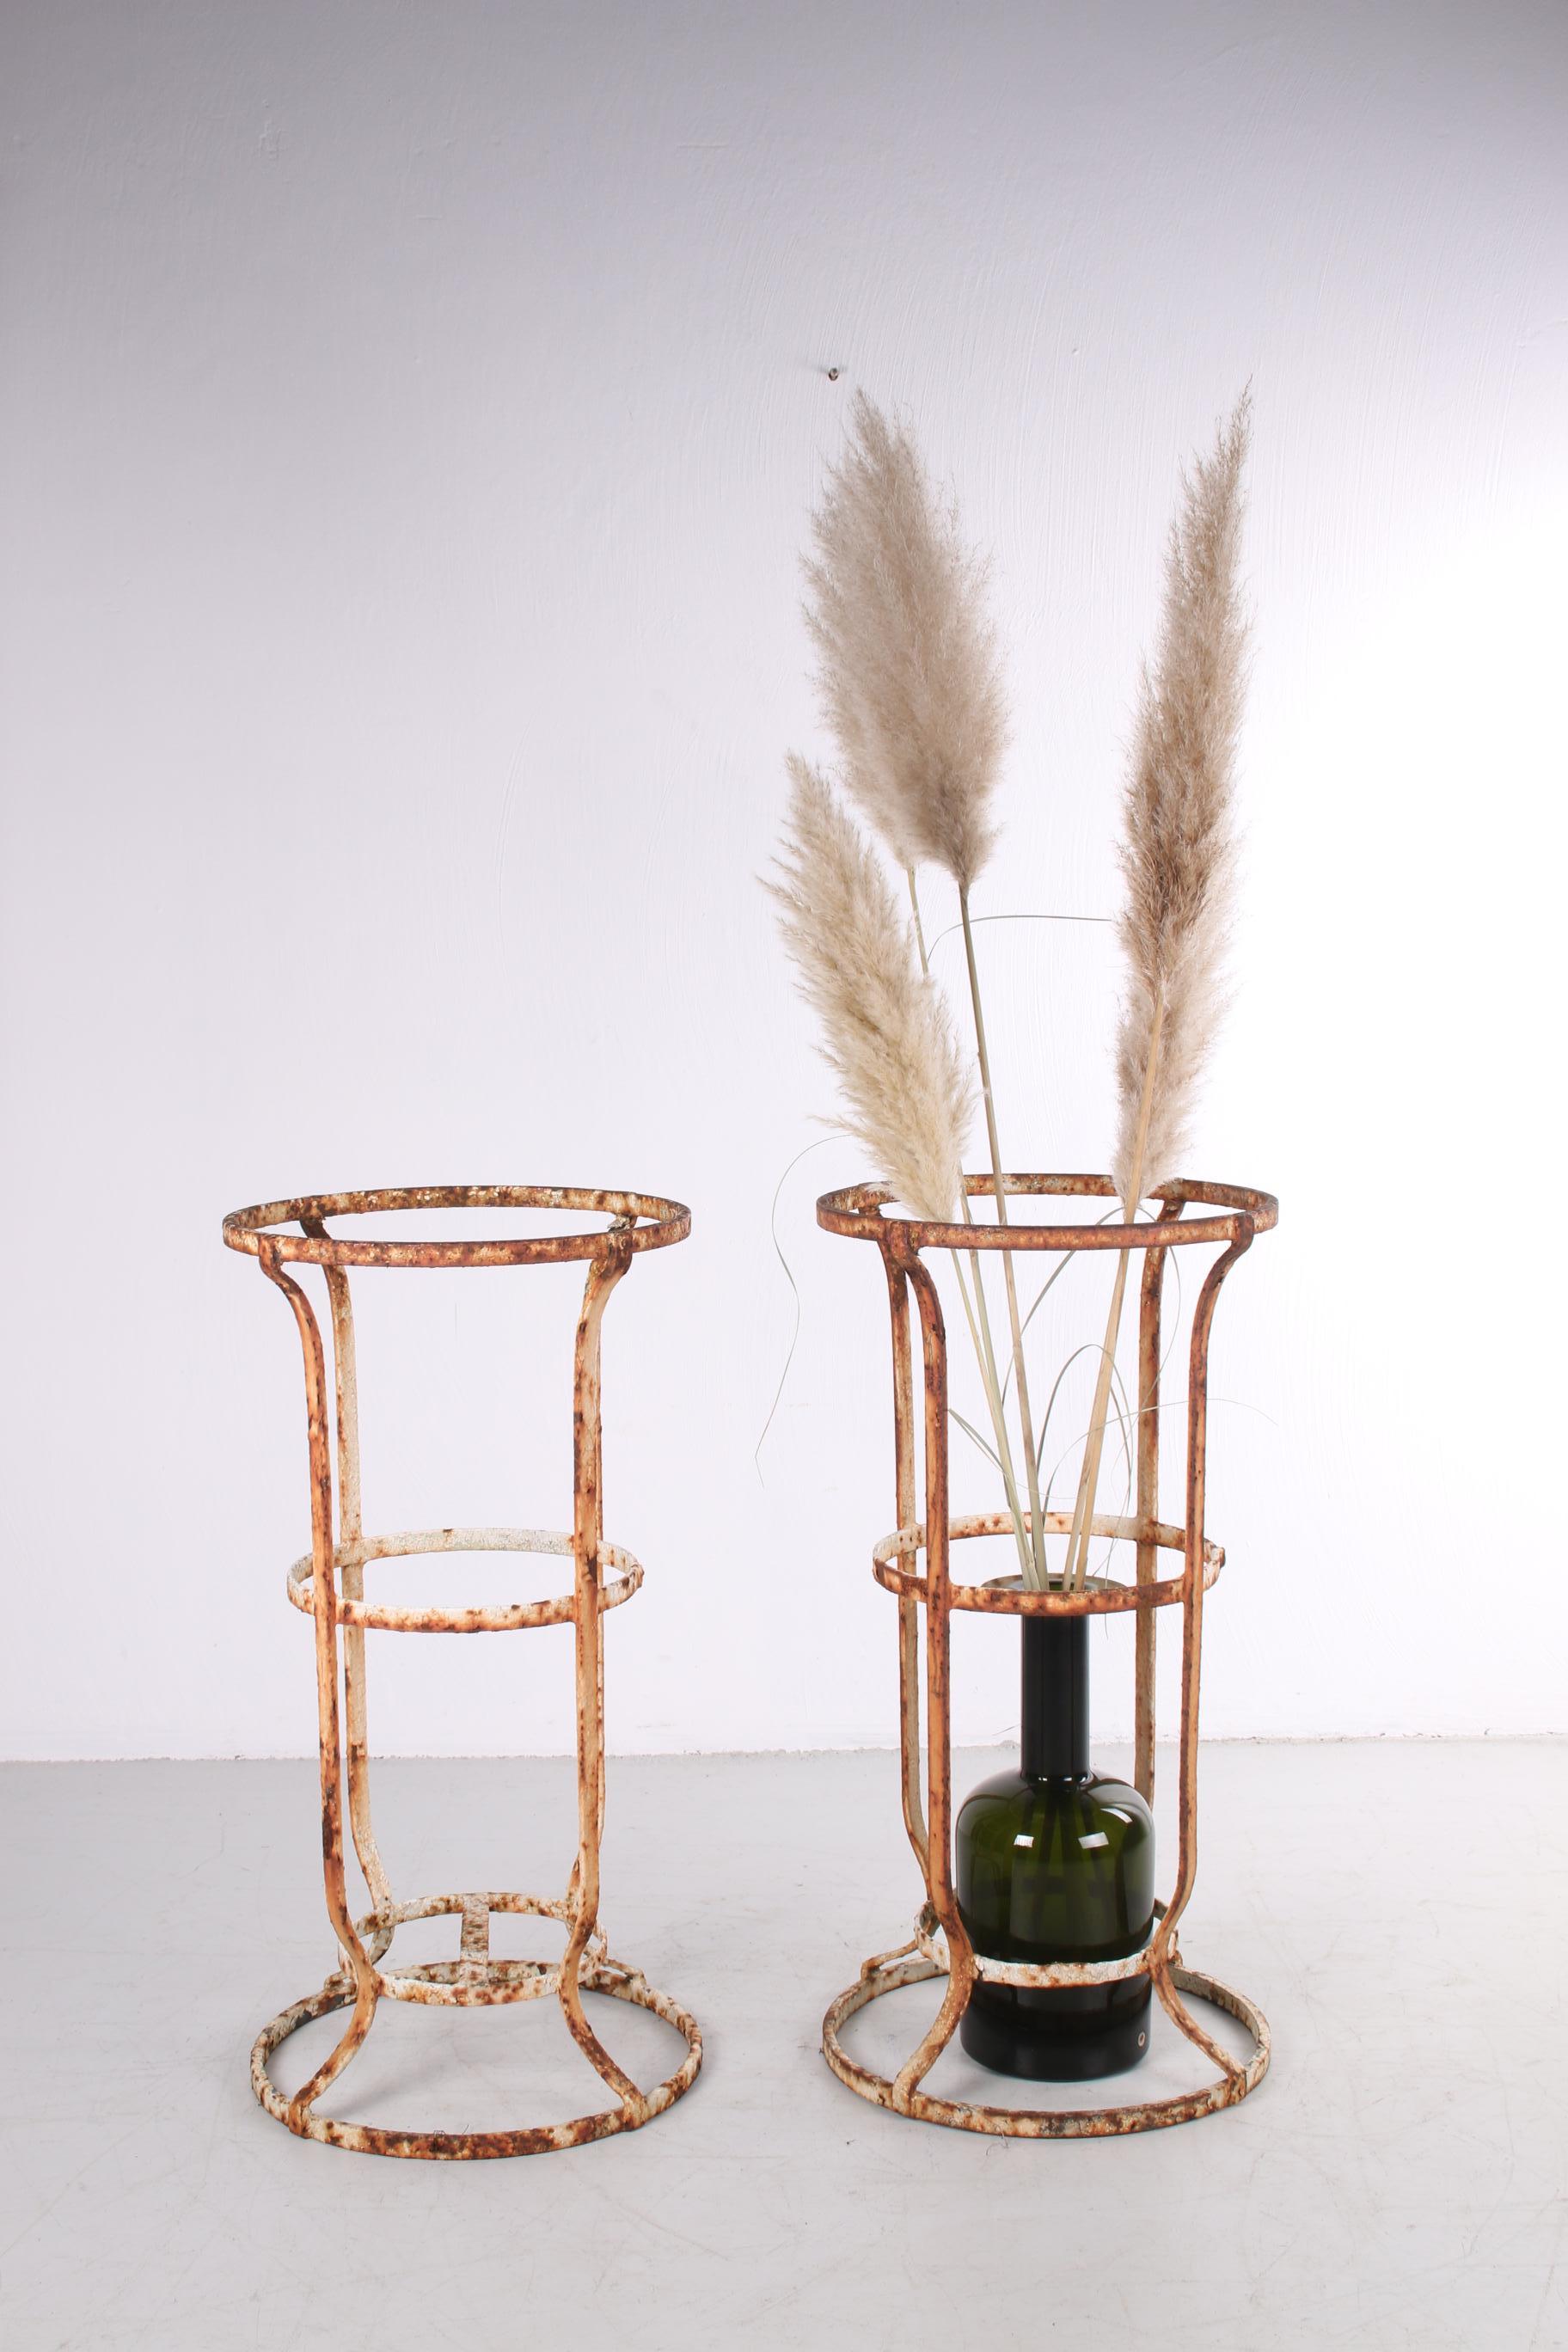 Very Old Wrought Iron French Garden Stand, a Set of 2 with Beautiful Patina For Sale 2